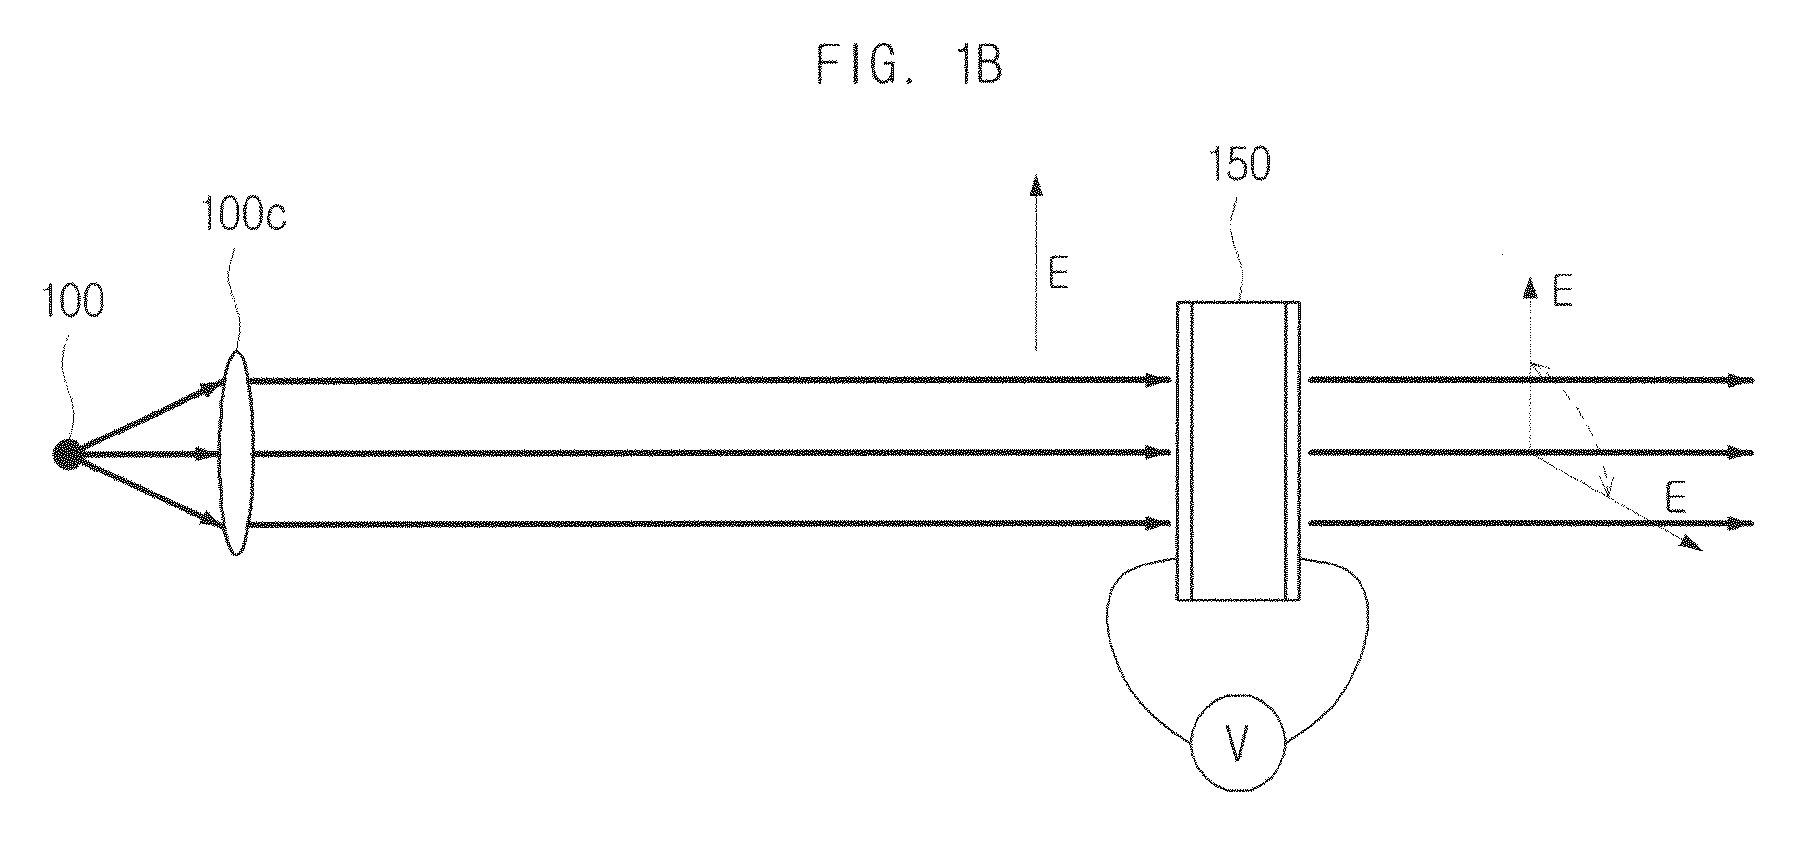 Projection display apparatus for suppressing speckle noise